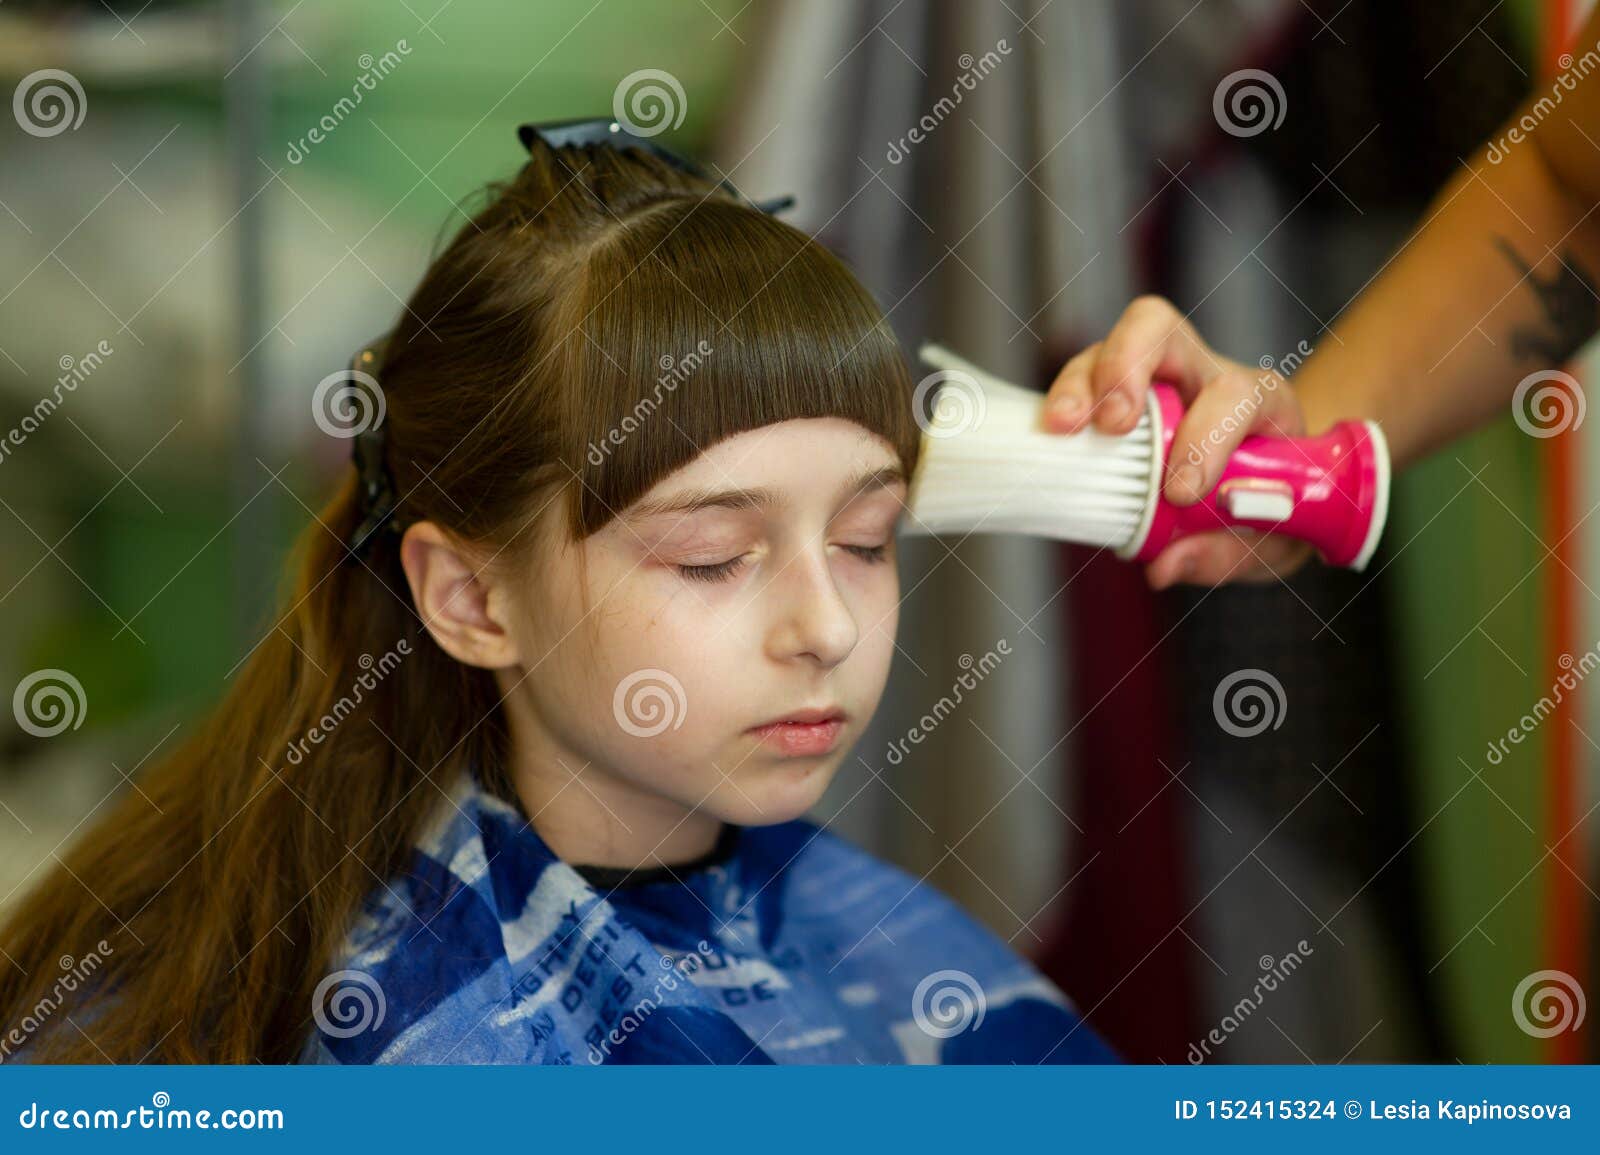 Hairdresser Making A Hair Style To Cute Little Girl Stock